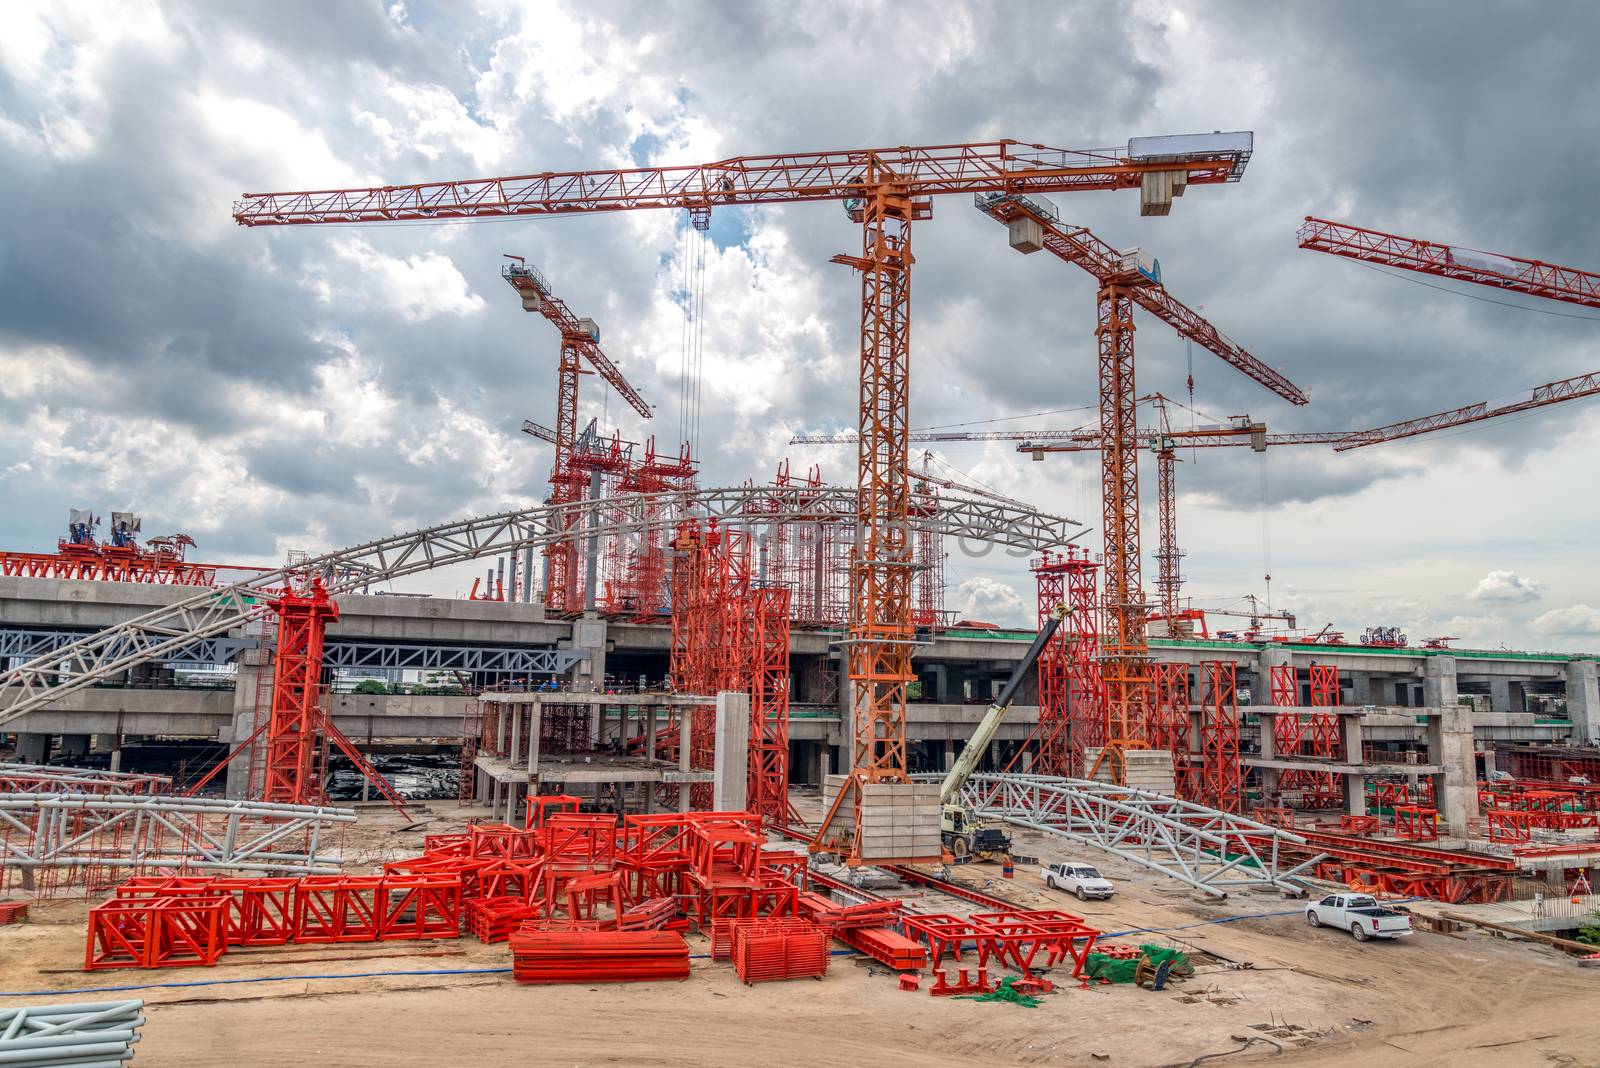 Industrial Cranes on Construction of Expressway Site in Asia by praethip